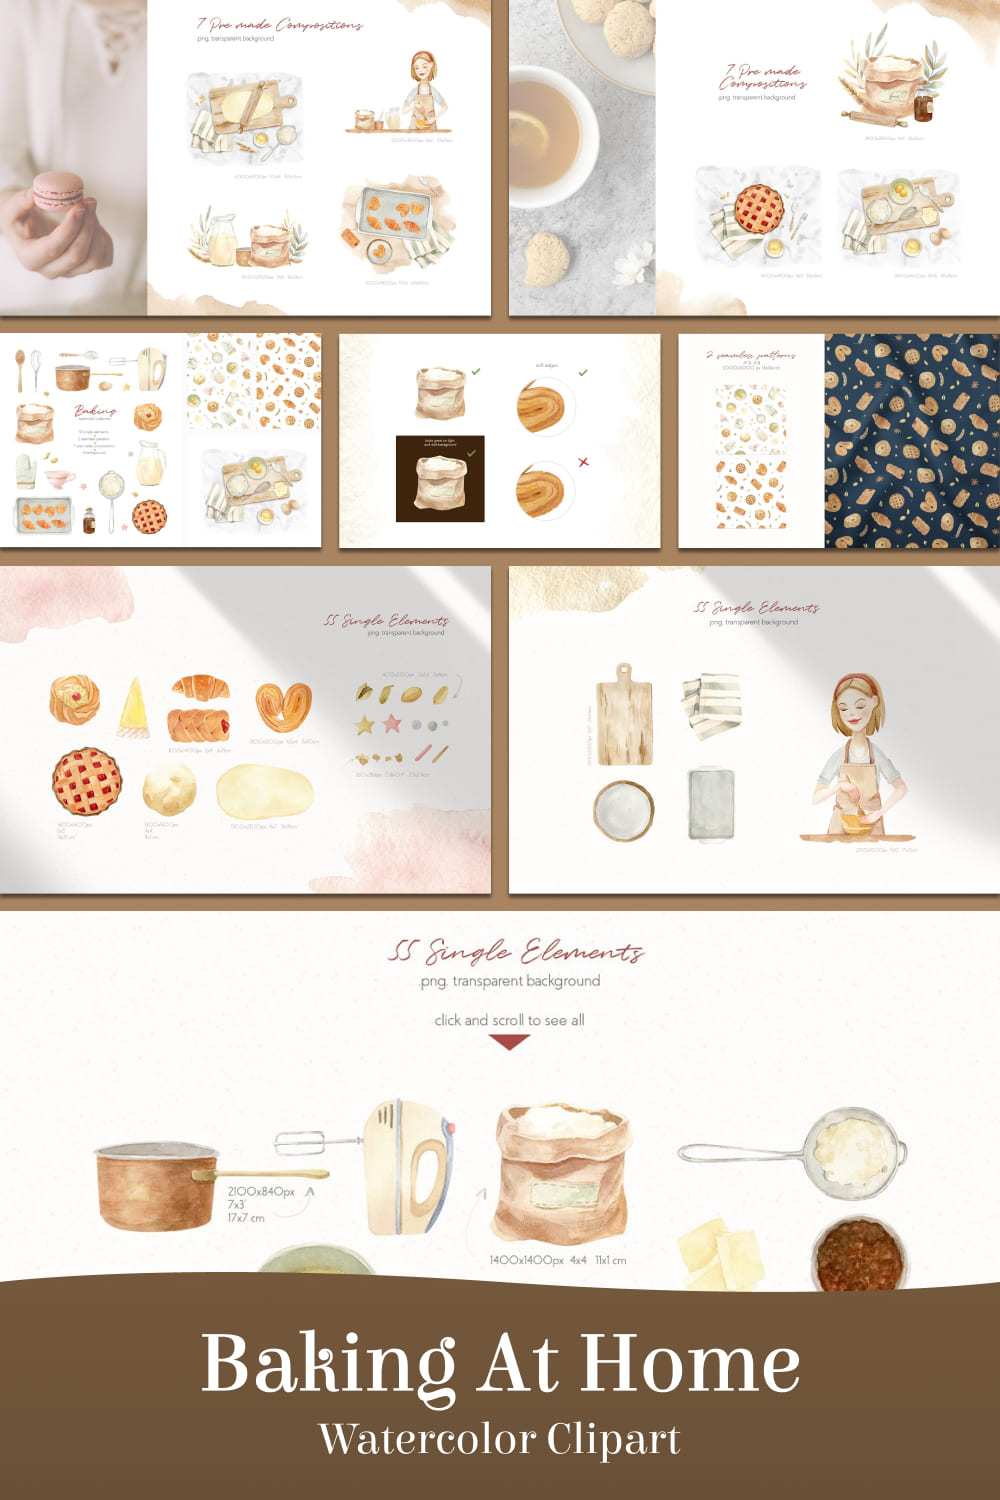 Baking at home watercolor clipart - pinterest image preview.